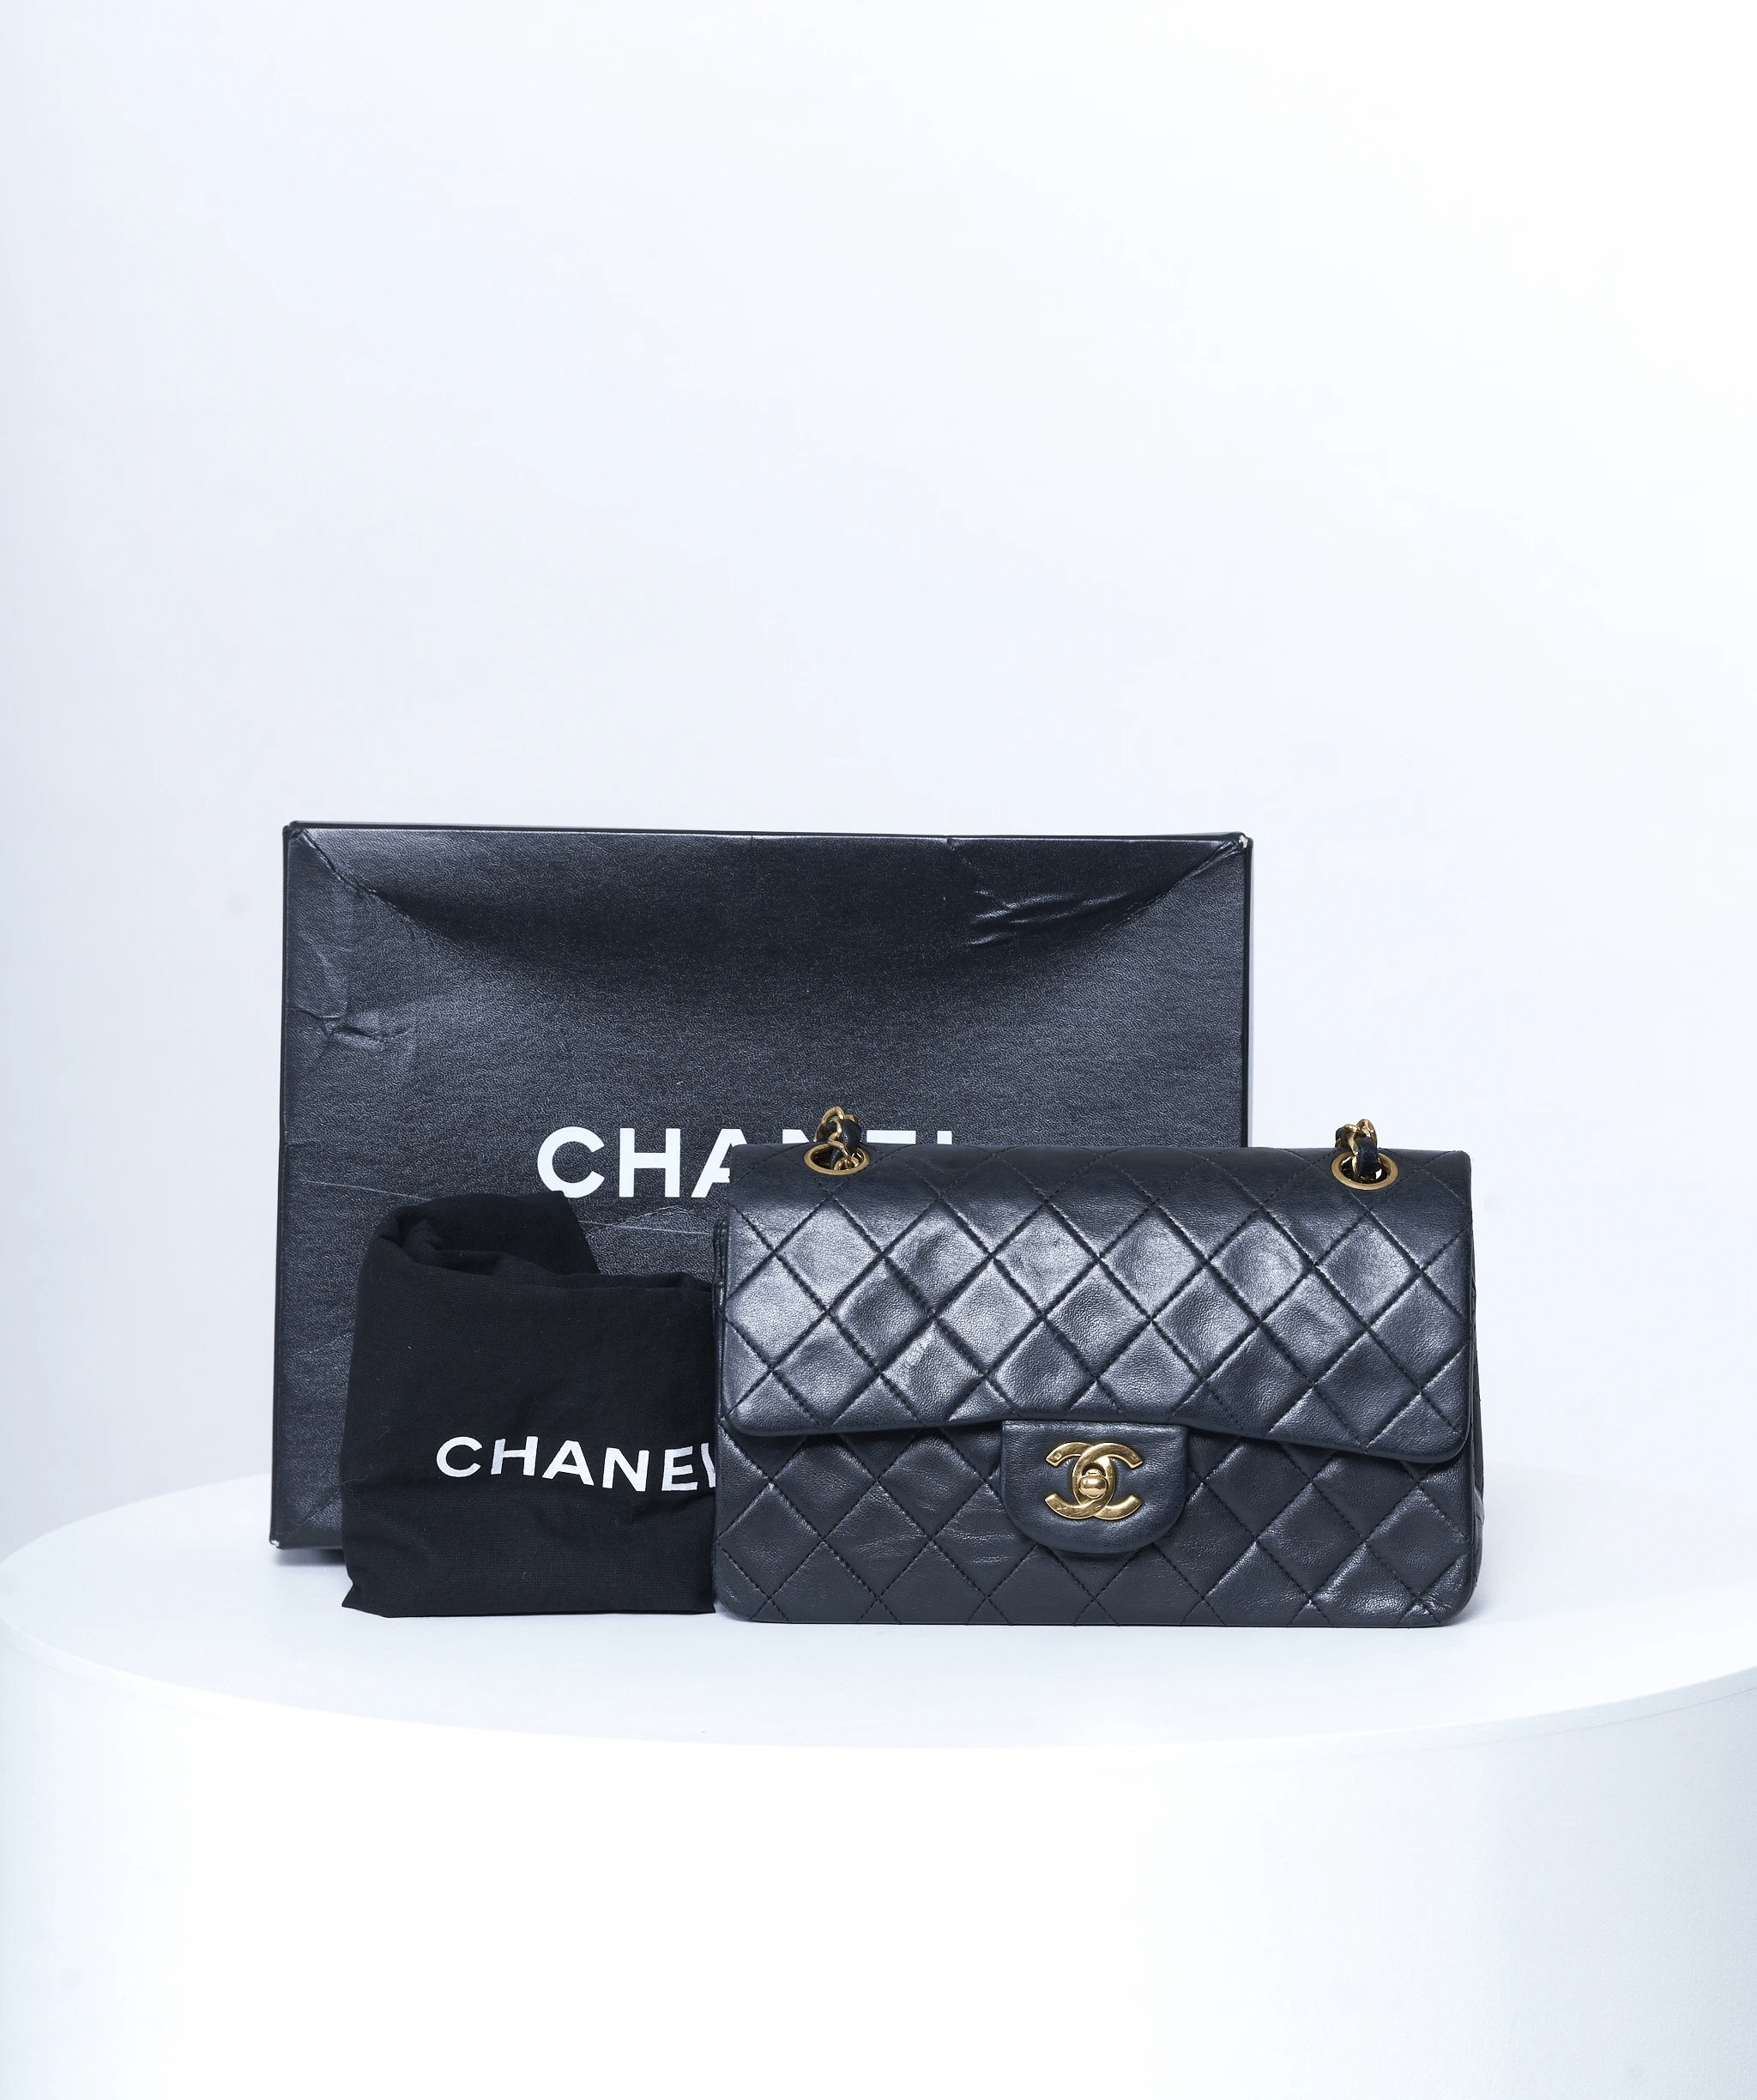 Chanel Chanel 9 inches - small bag